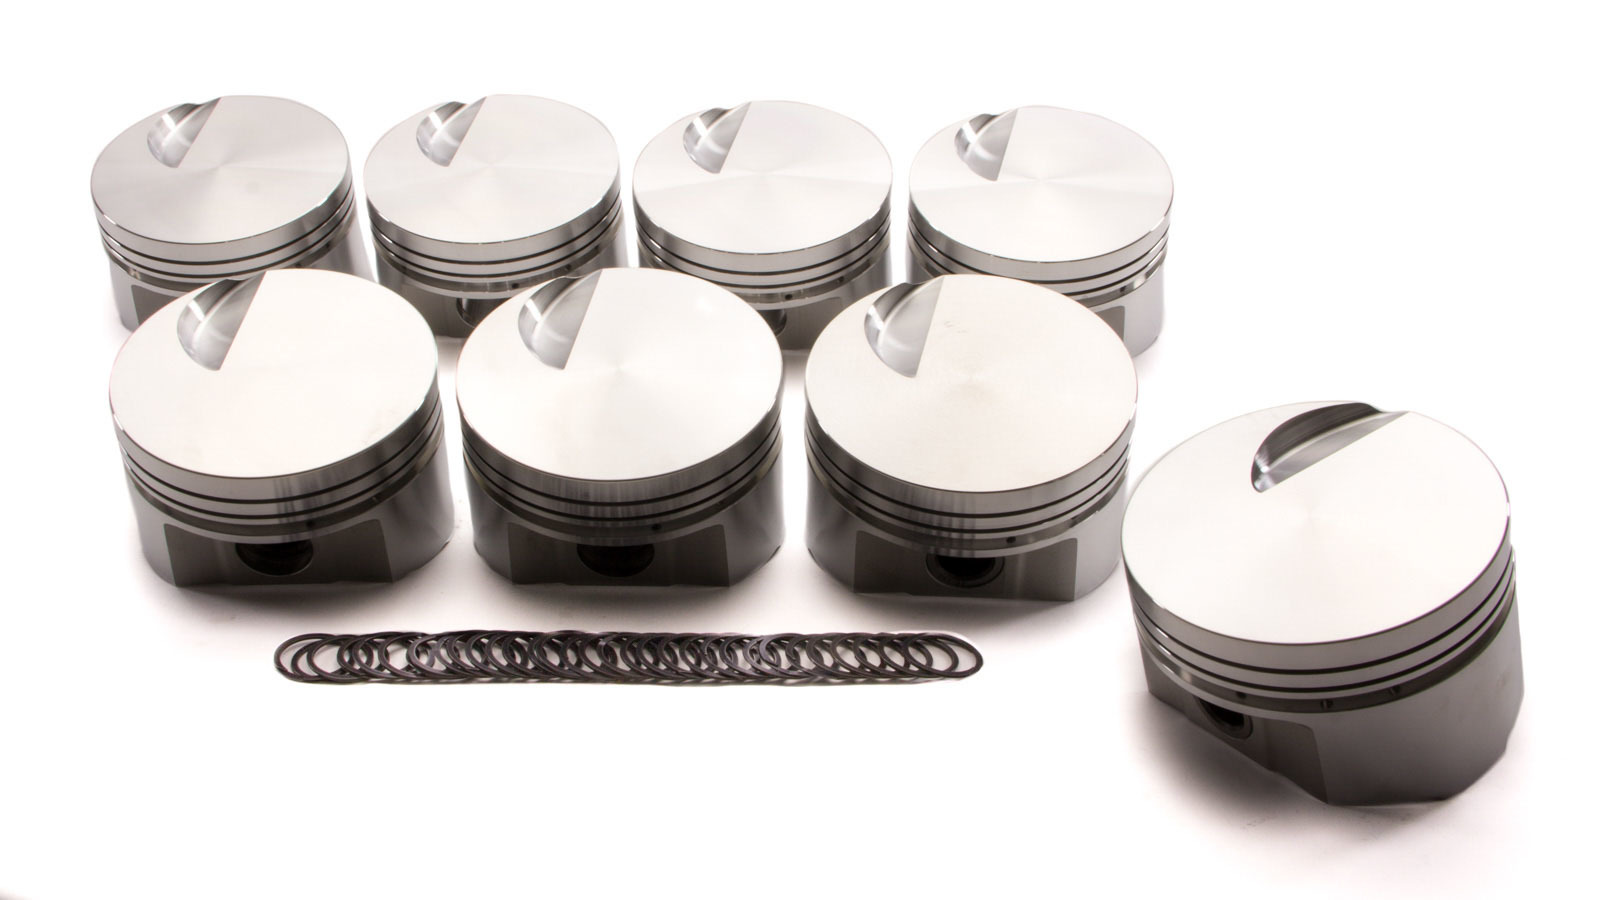 SRP Pistons 139478 Piston, Flat Top, Forged, 4.310 in Bore, 1/16 x 1/16 x 3/16 in Ring Grooves, Minus 3.00 cc, Big Block Chevy, Set of 8